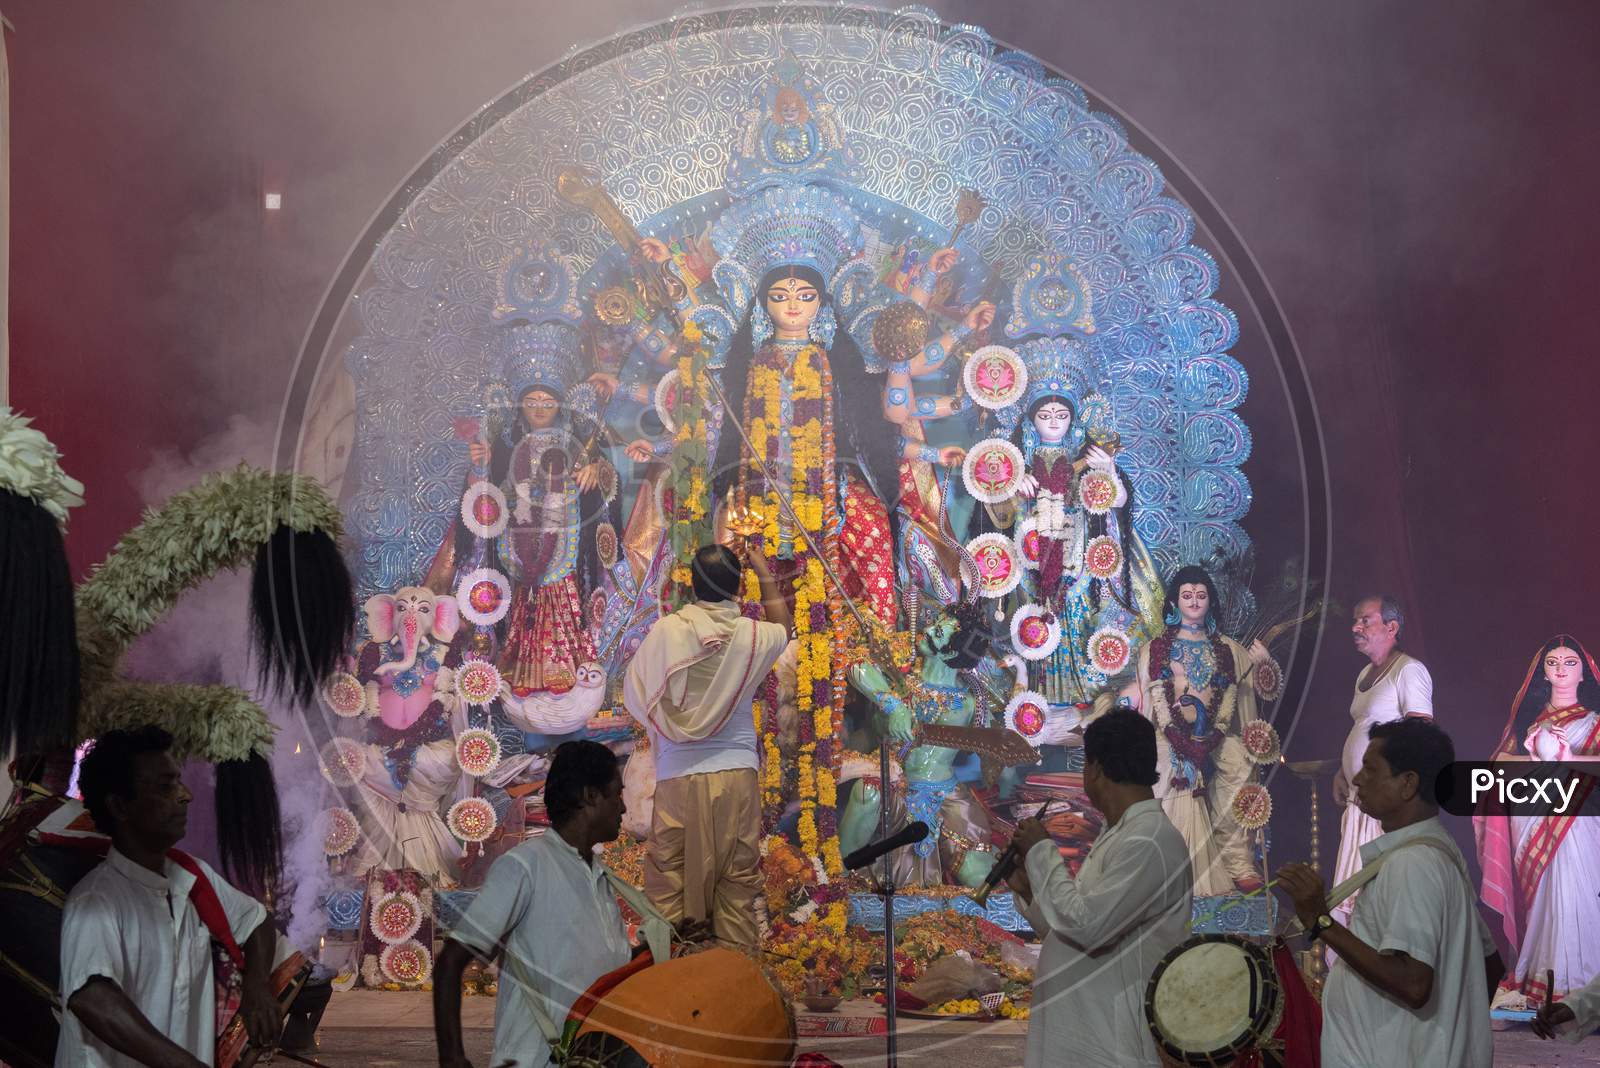 Indian Drummers playing during Durga Puja